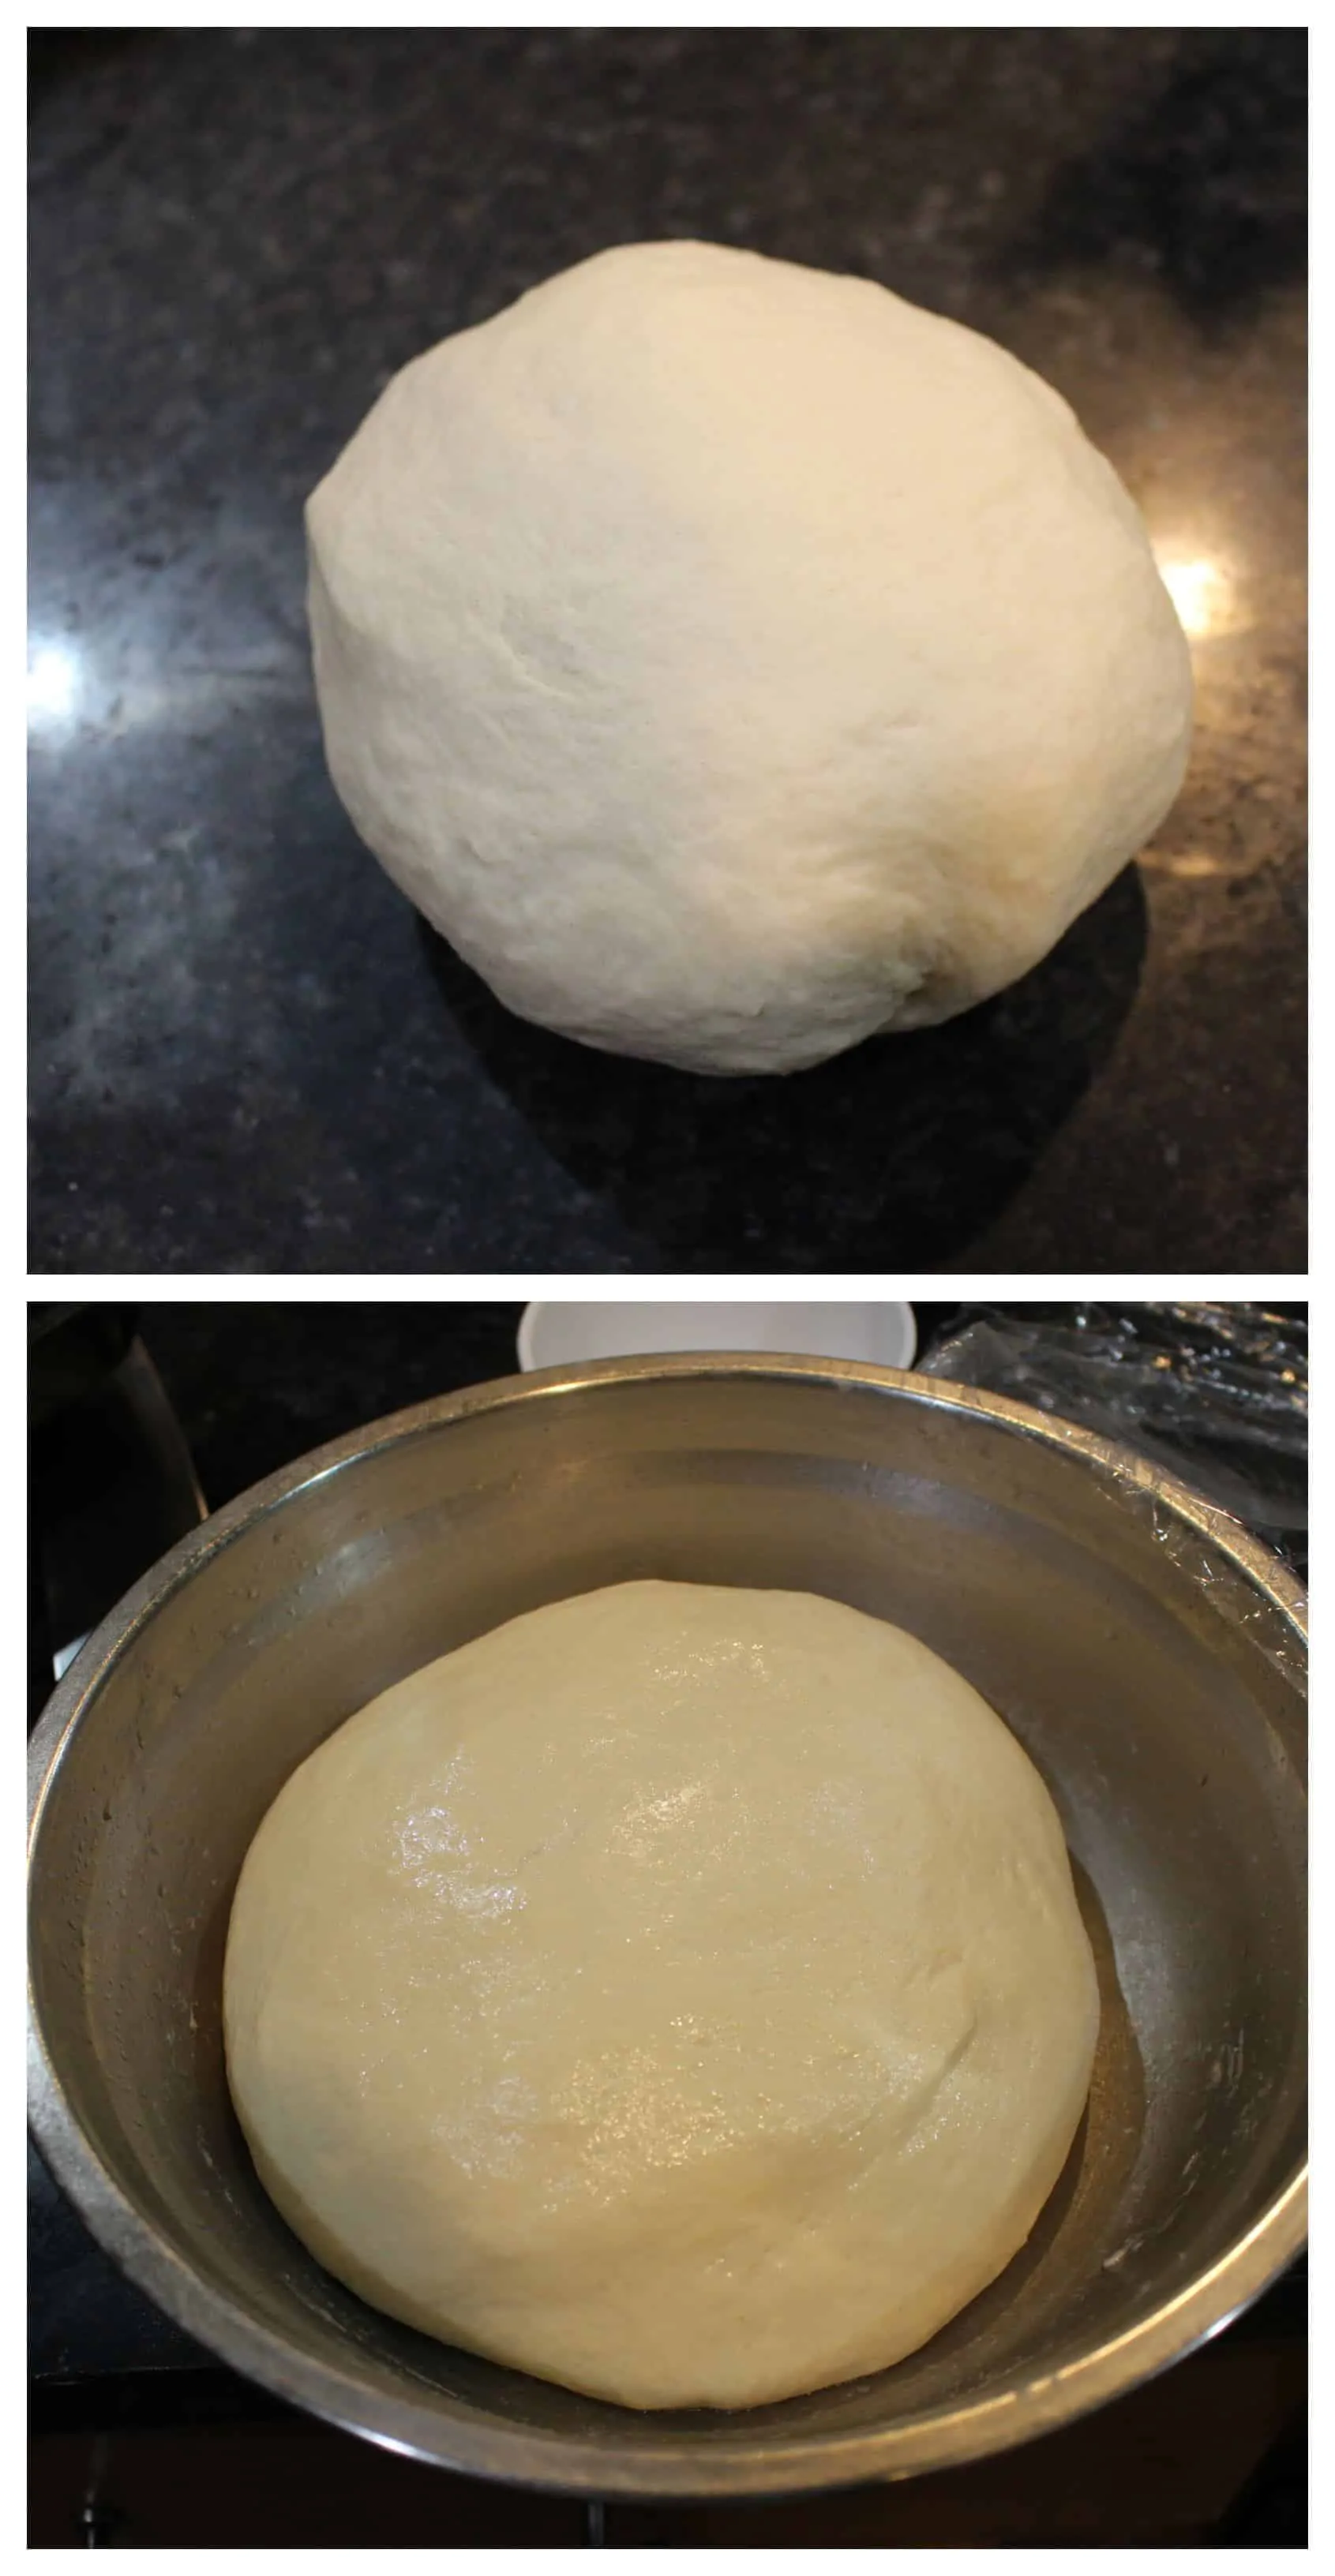 Proofing dough